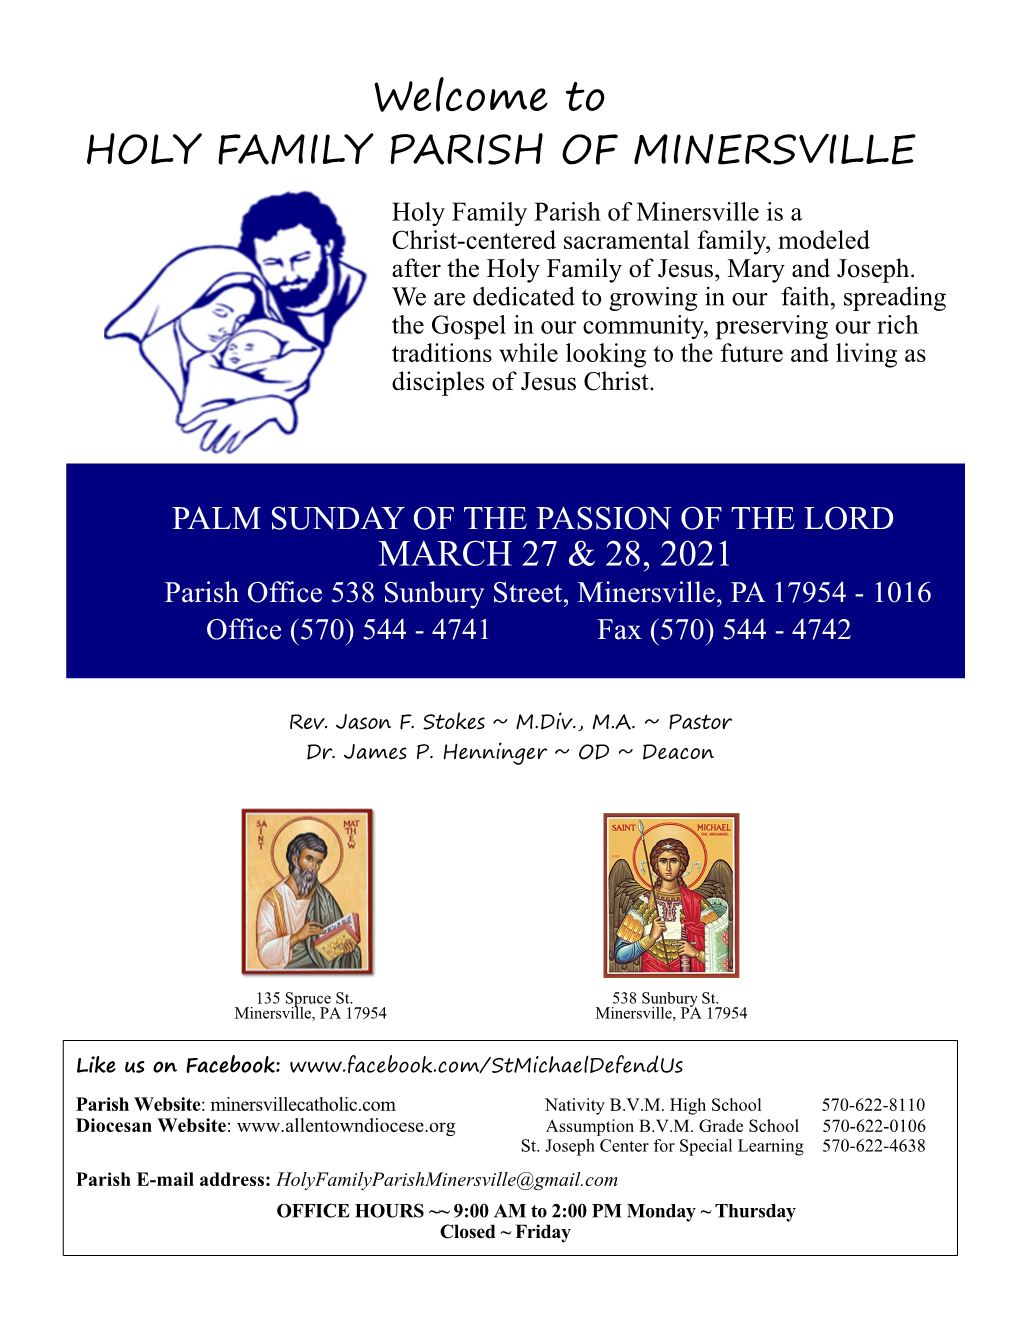 Welcome to HOLY FAMILY PARISH of MINERSVILLE